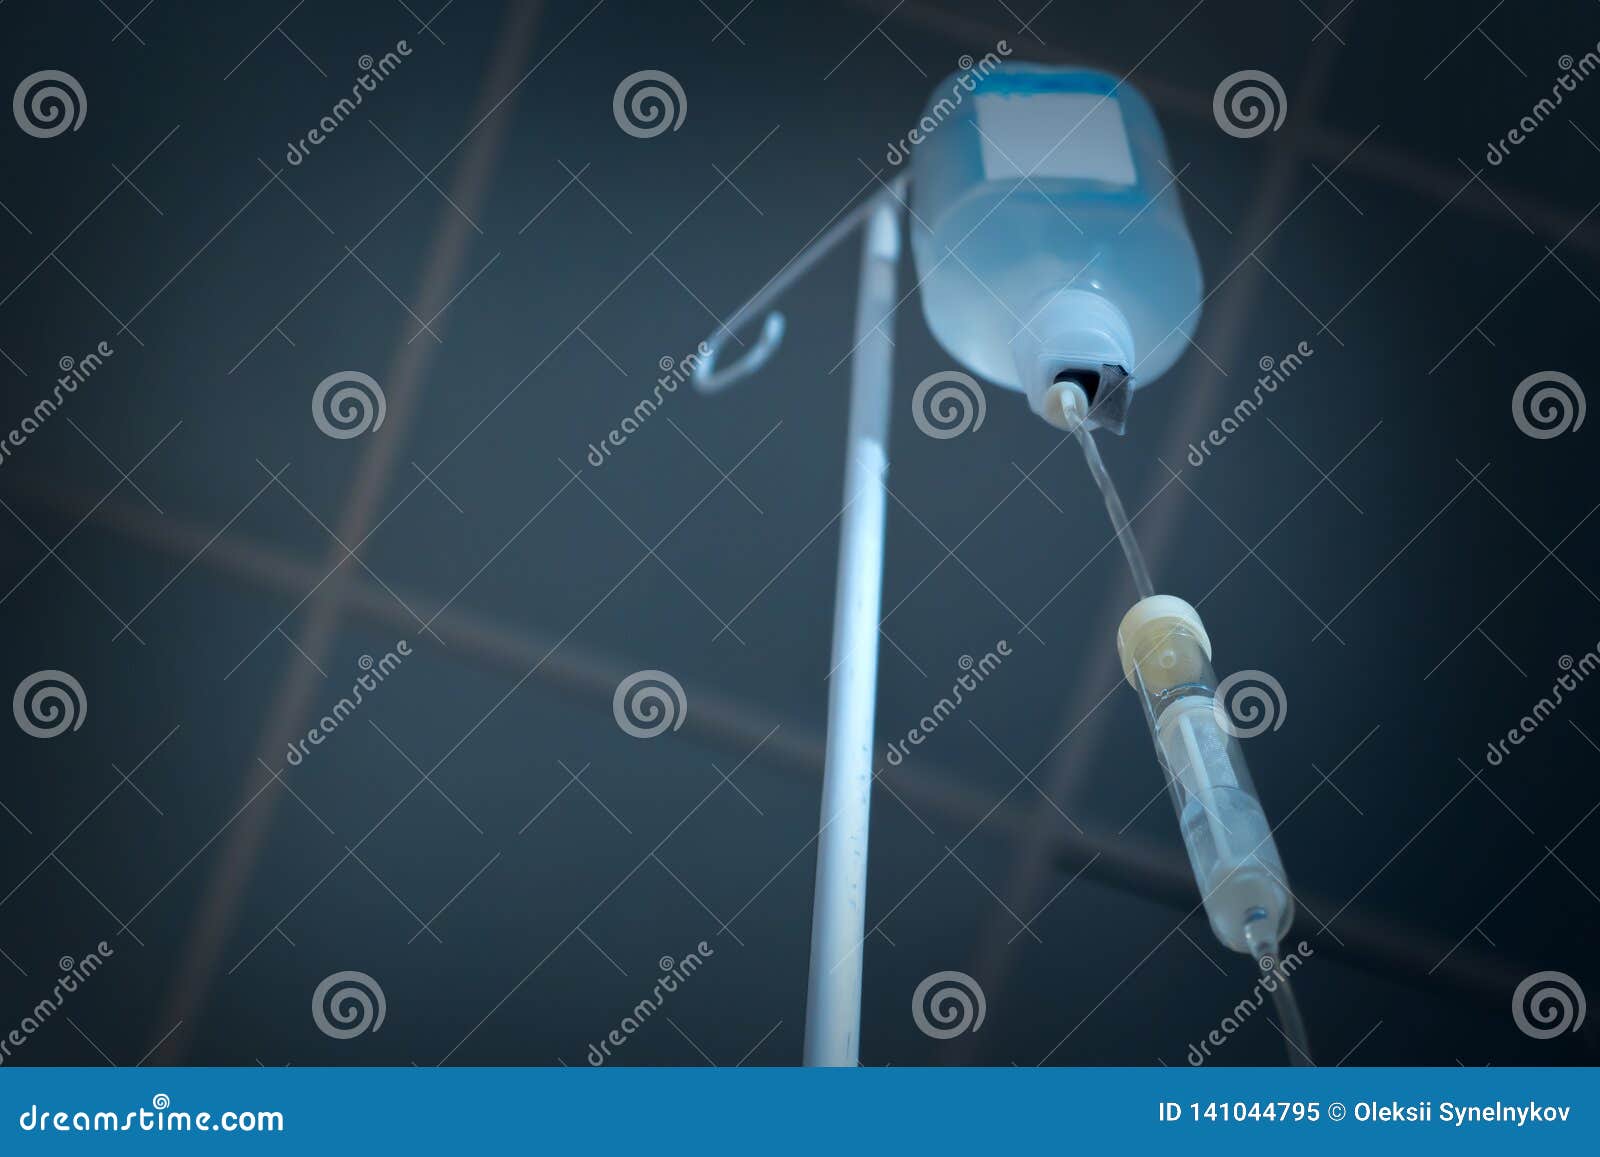 anesthesia euthanasia concept. infusion drip in hospital. saline solution drip for patient hospital. recovery after